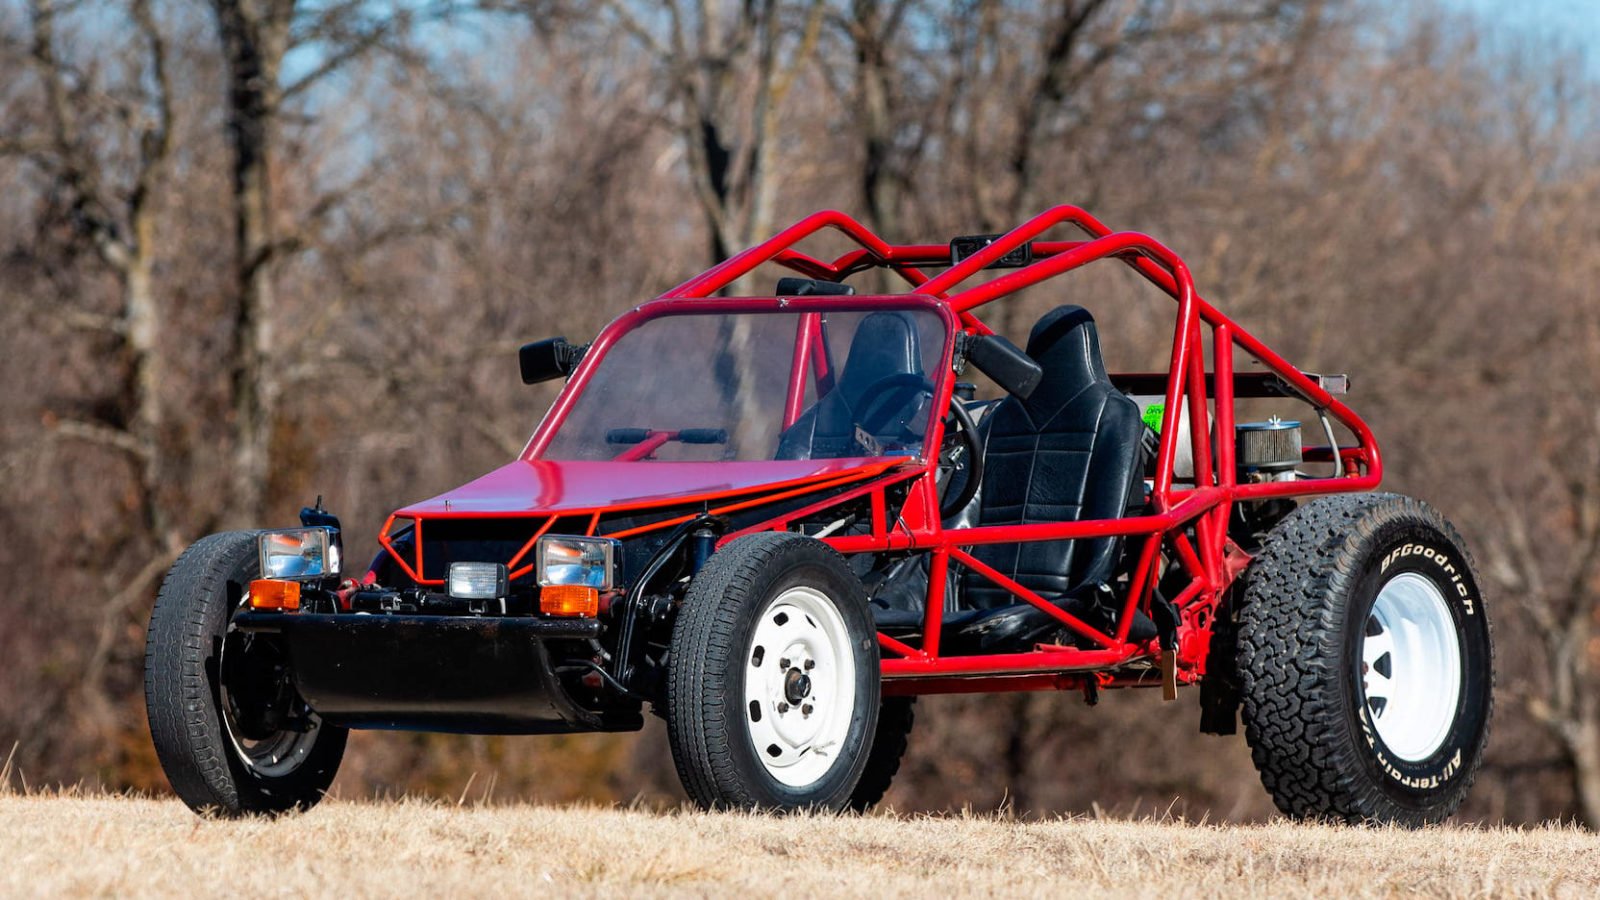 This Is A American Sand Rail: A Beetle Powered Dune Racer